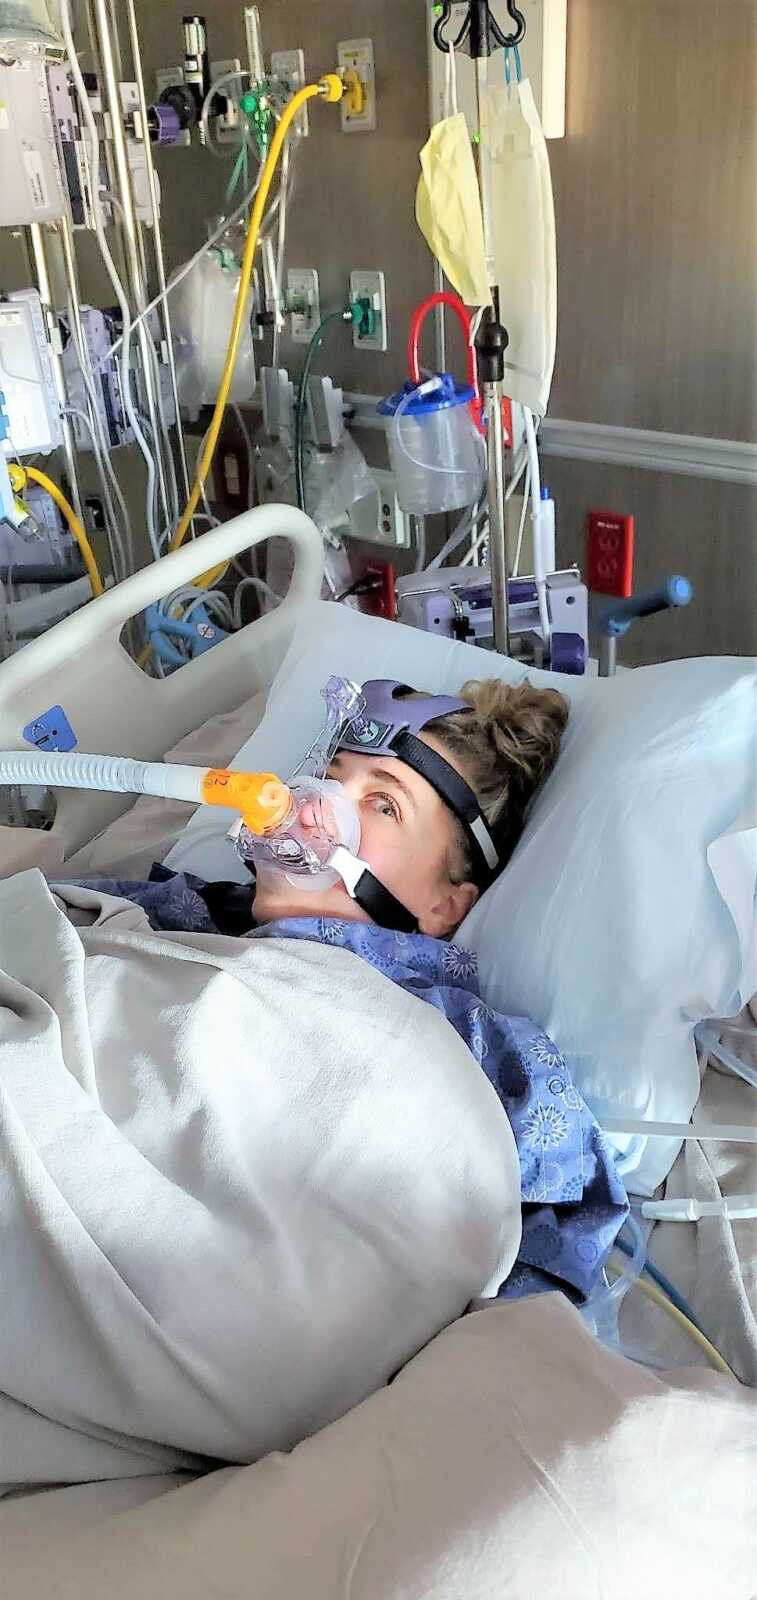 woman with multiple broken bones laying at a hospital bed with oxygen tube attached to her face after skydiving accident 